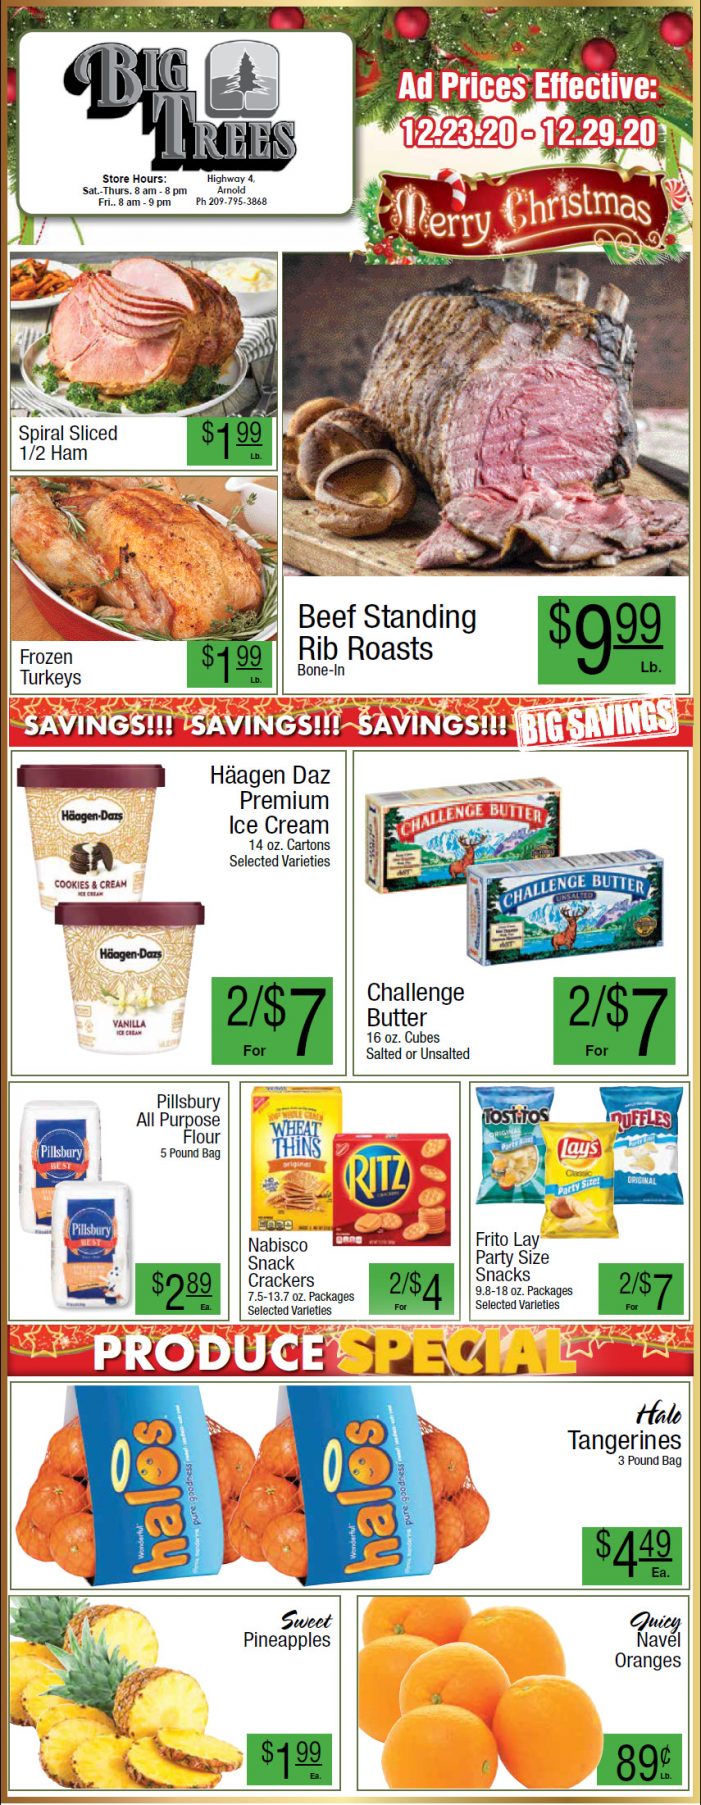 Big Trees Market Weekly Ad & Grocery Specials Through December 29th!